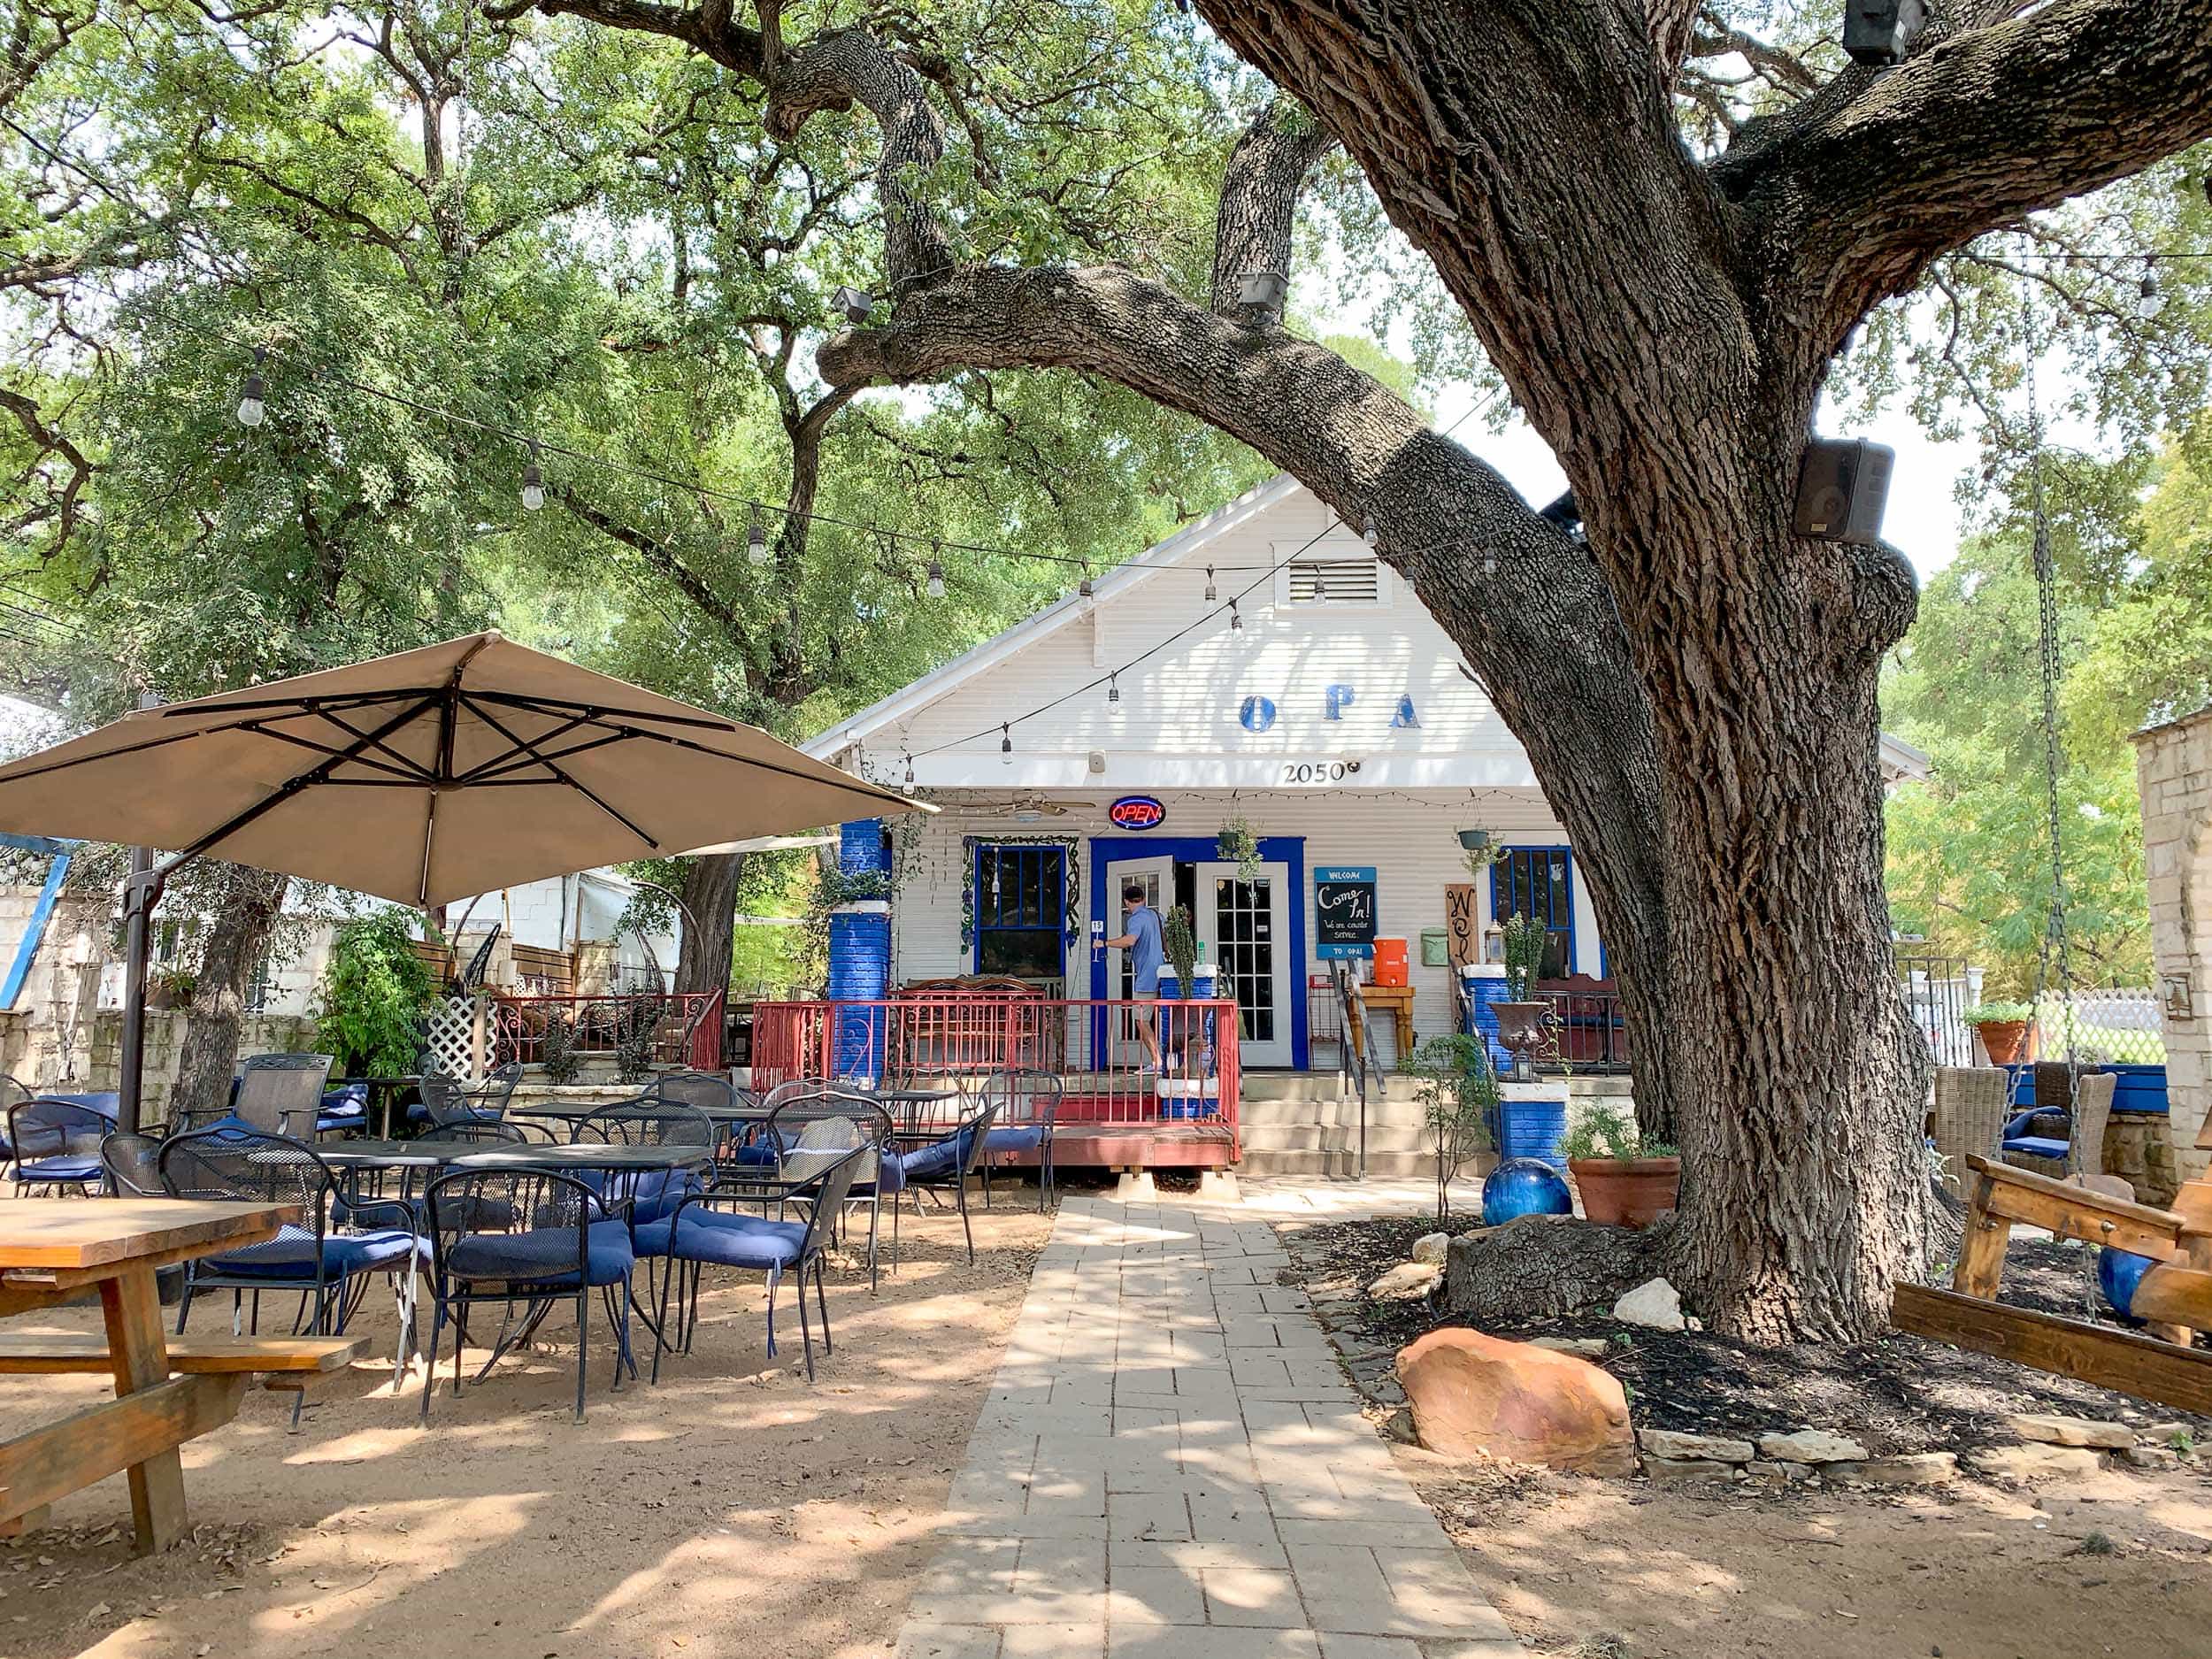 Opa Coffee and Wine Bar is one of the best coffee shops in Austin